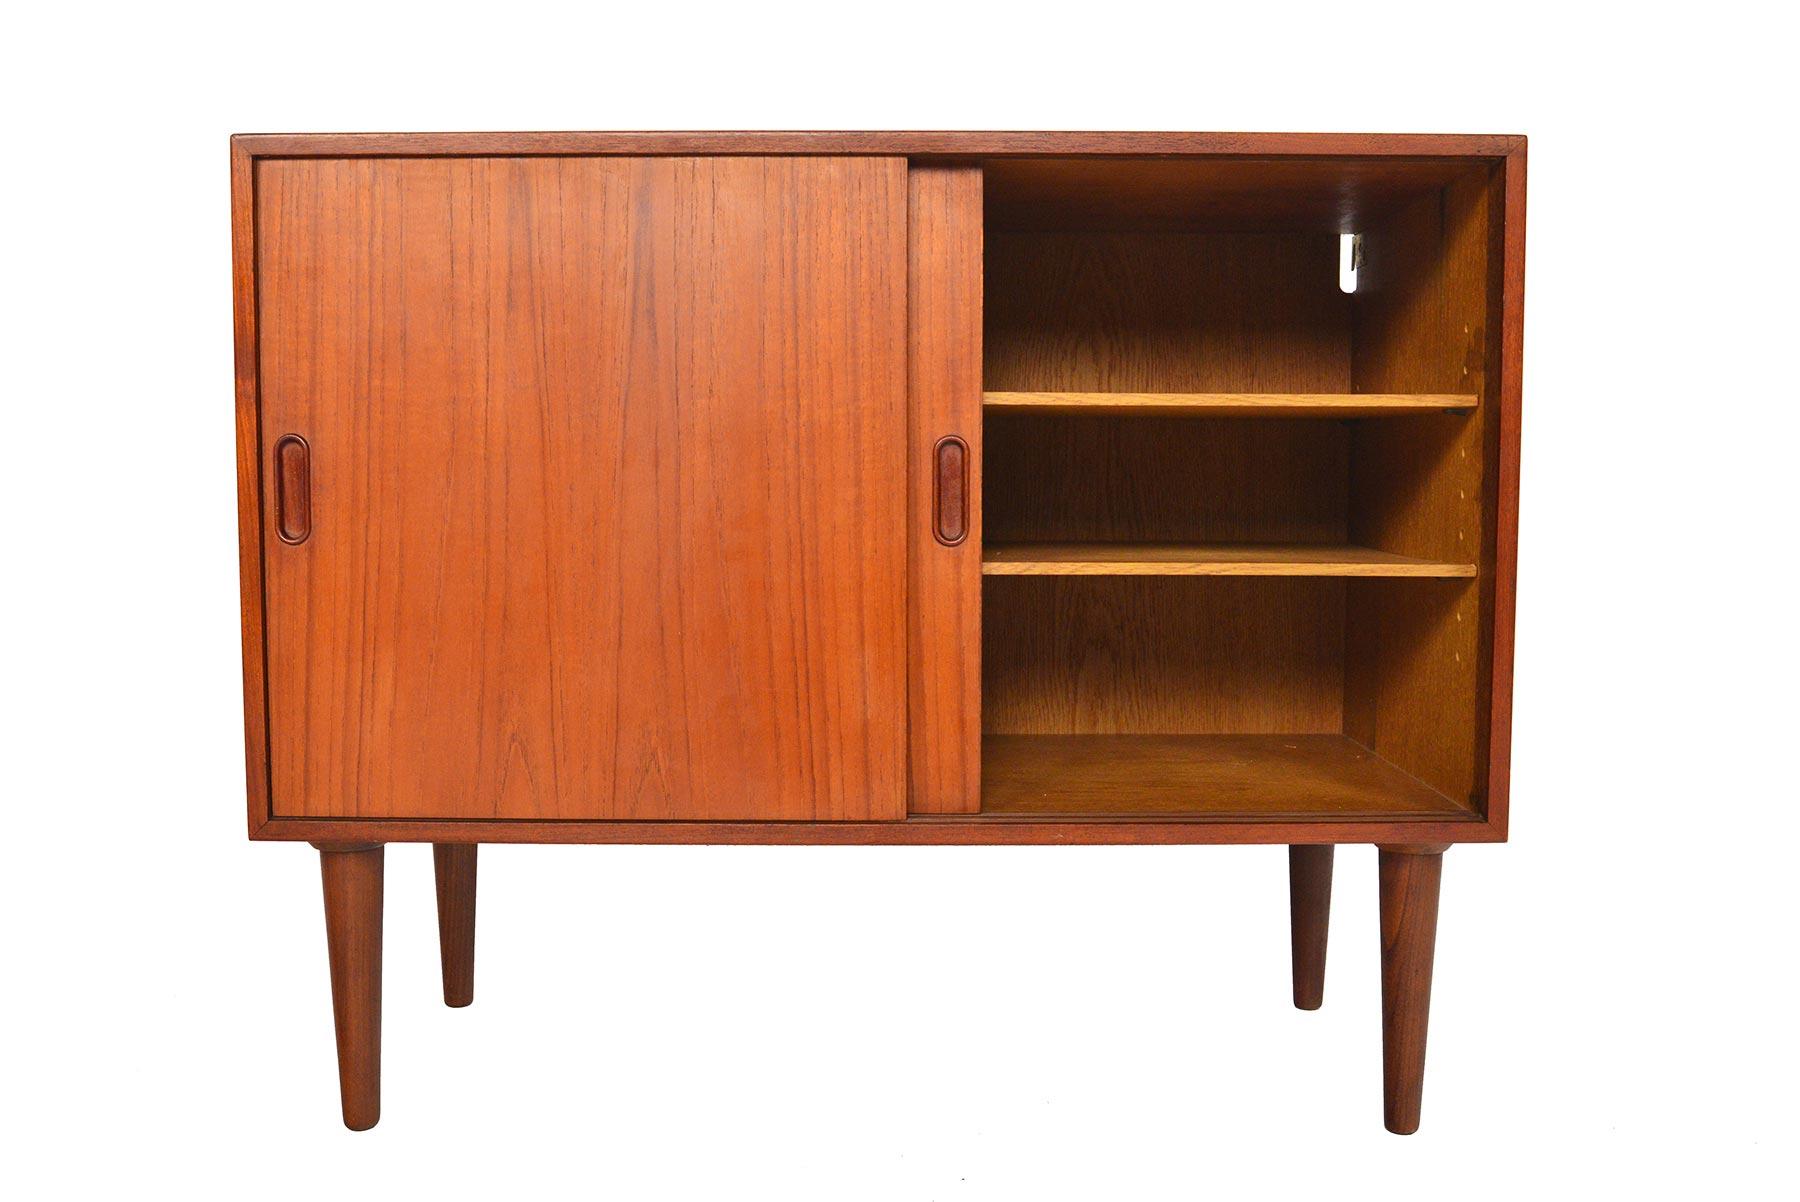 This small Danish modern midcentury credenza is the perfect storage solution for any modern home. Crafted in teak, this piece features two sliding doors which open to an oak lined interior offering two bays and adjustable shelves. Piece stands on